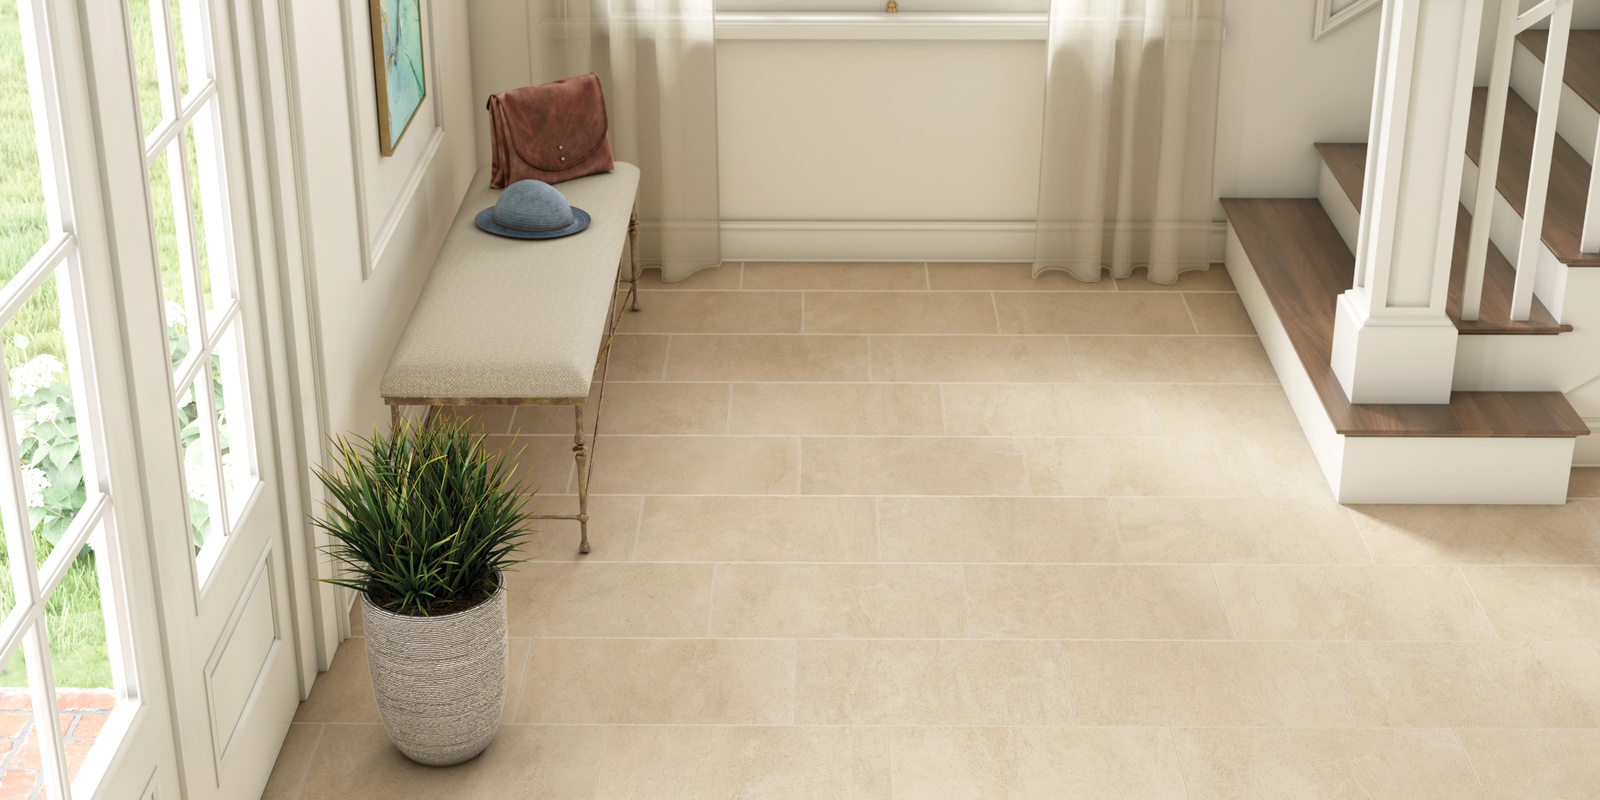 Find Perfect Tiles - View Our Selection of Tiles | Florida Tile